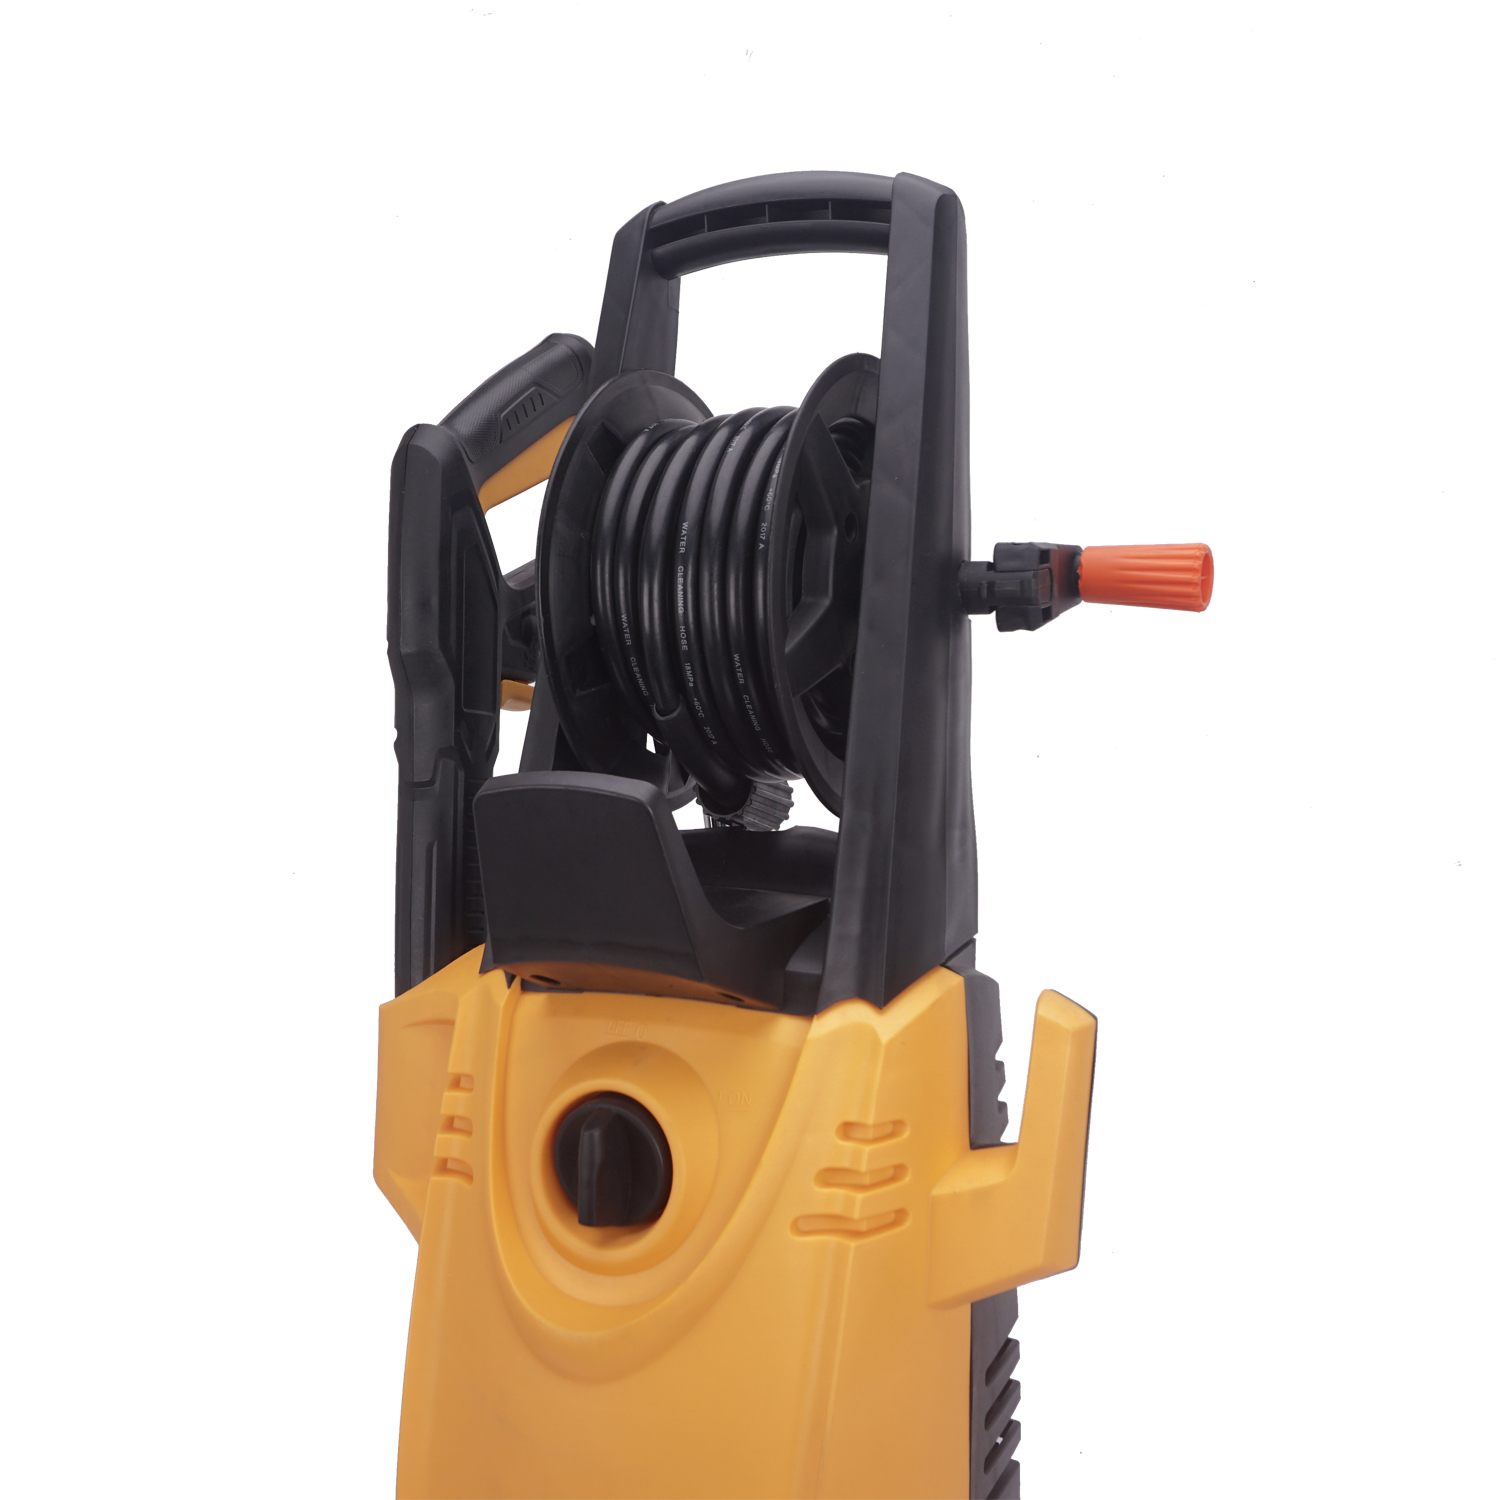 Powerful Electric Pressure Washer